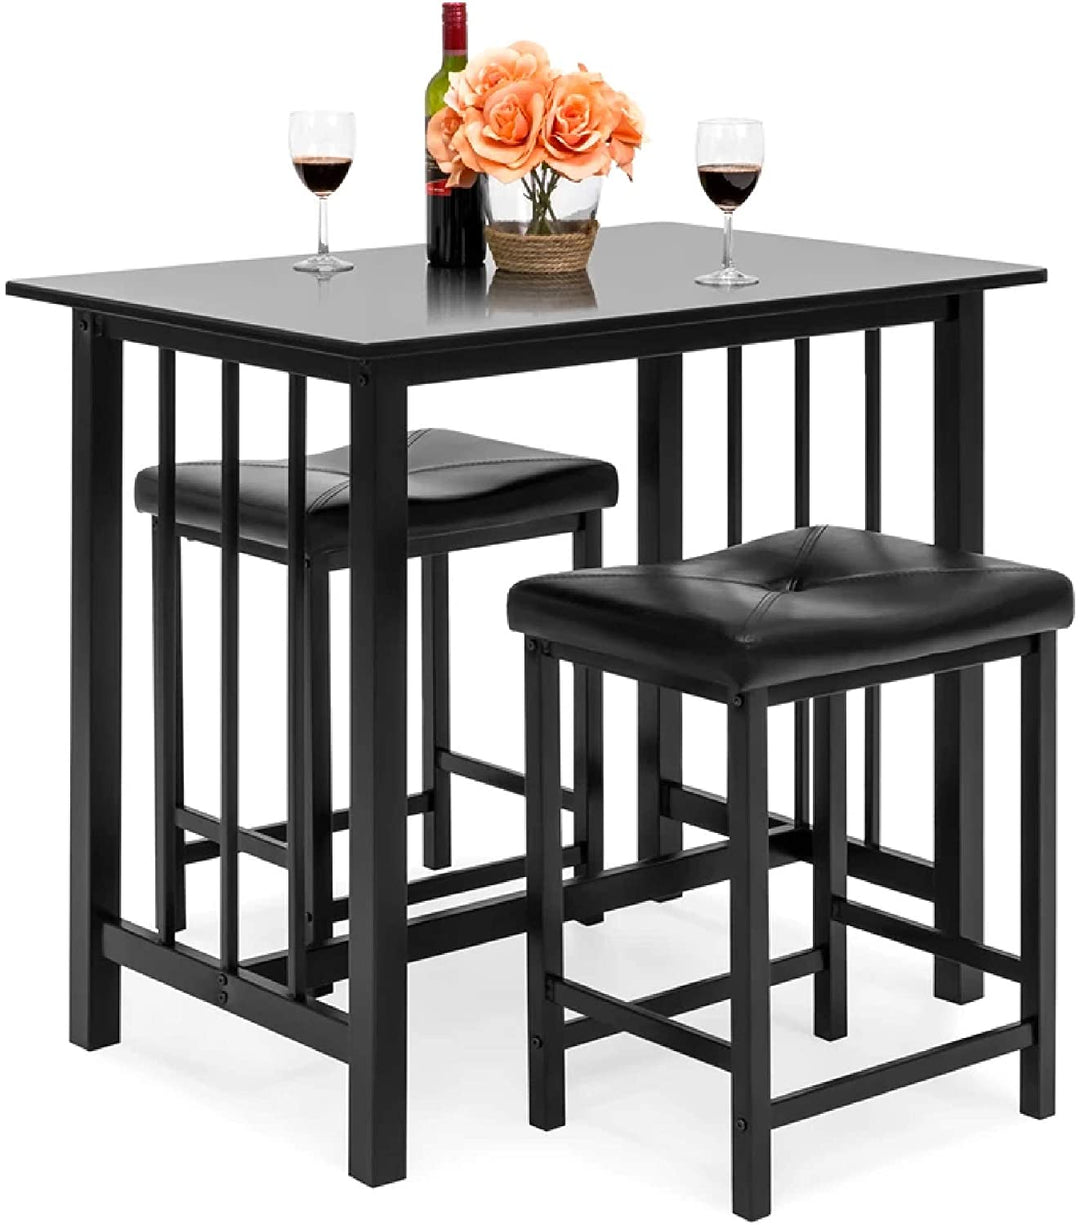 Best Choice Products 3-Piece Counter Height Dining Table Furniture Set for Kitchen, Bar, Bonus Room W/ 2 Faux Leather Backless Stools, Compact, Space-Saving Design - Black